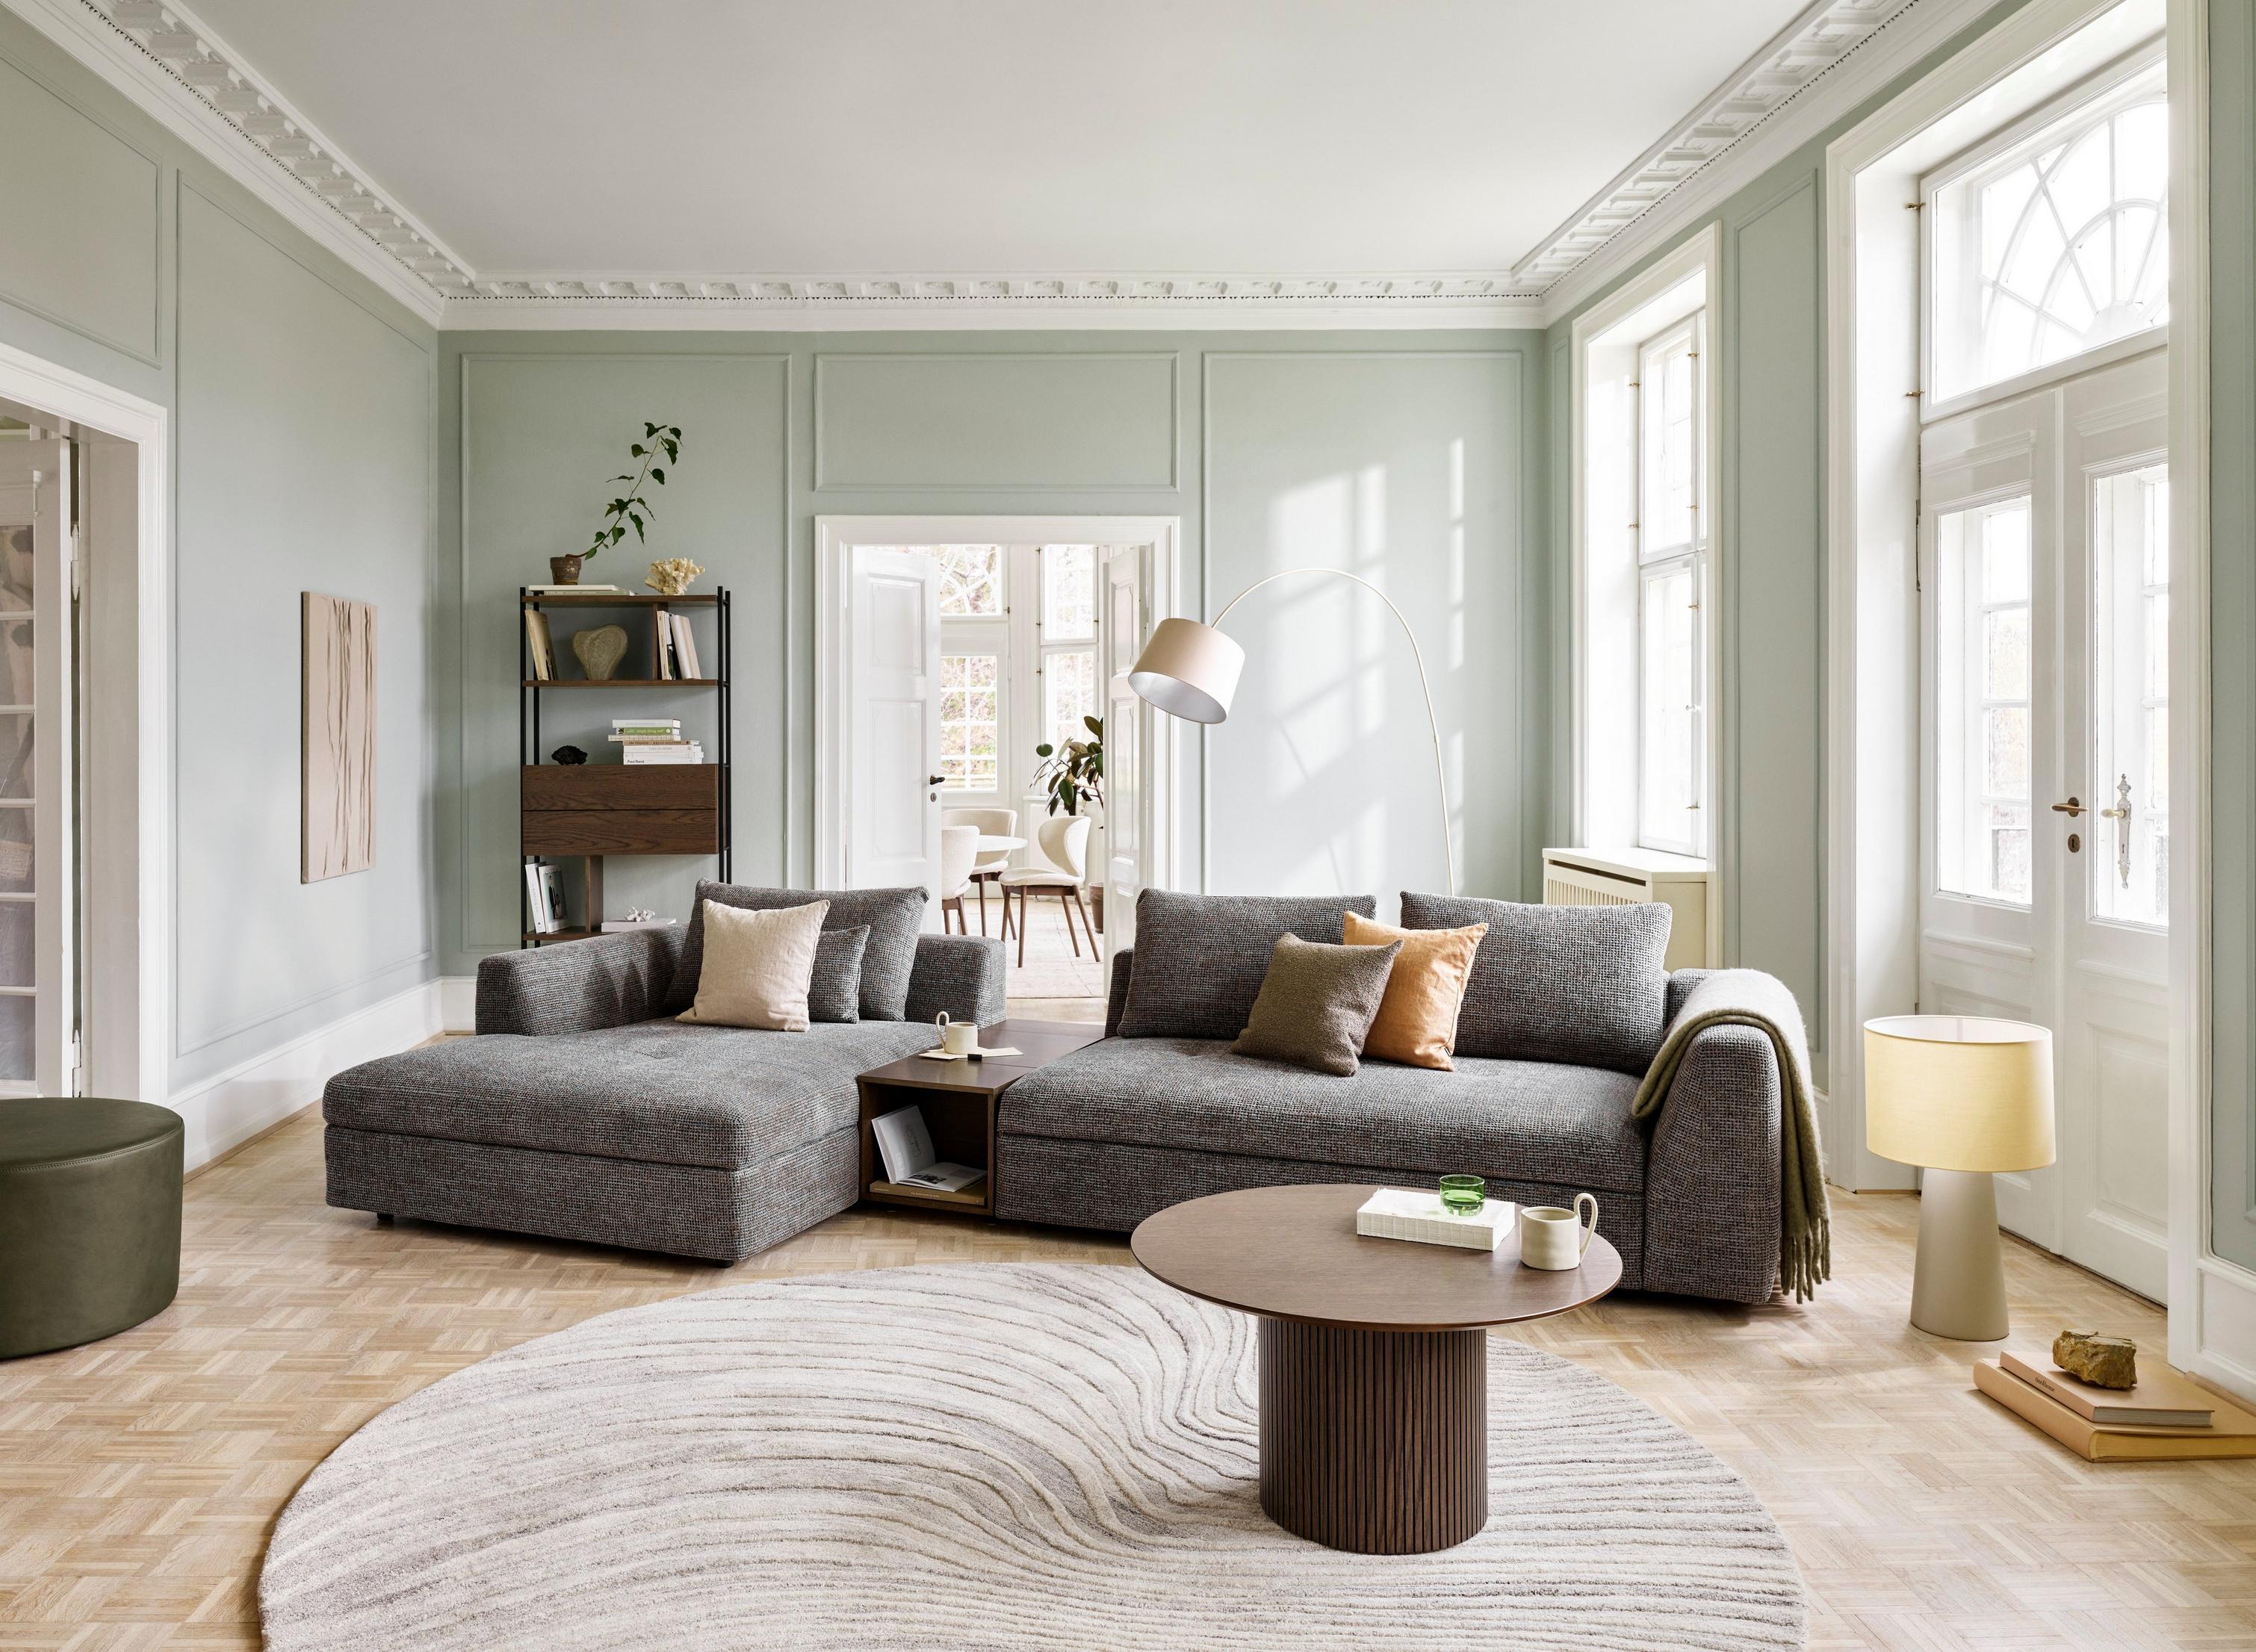 A social living space featuring the Bergamo chaise longue sofa with storage.